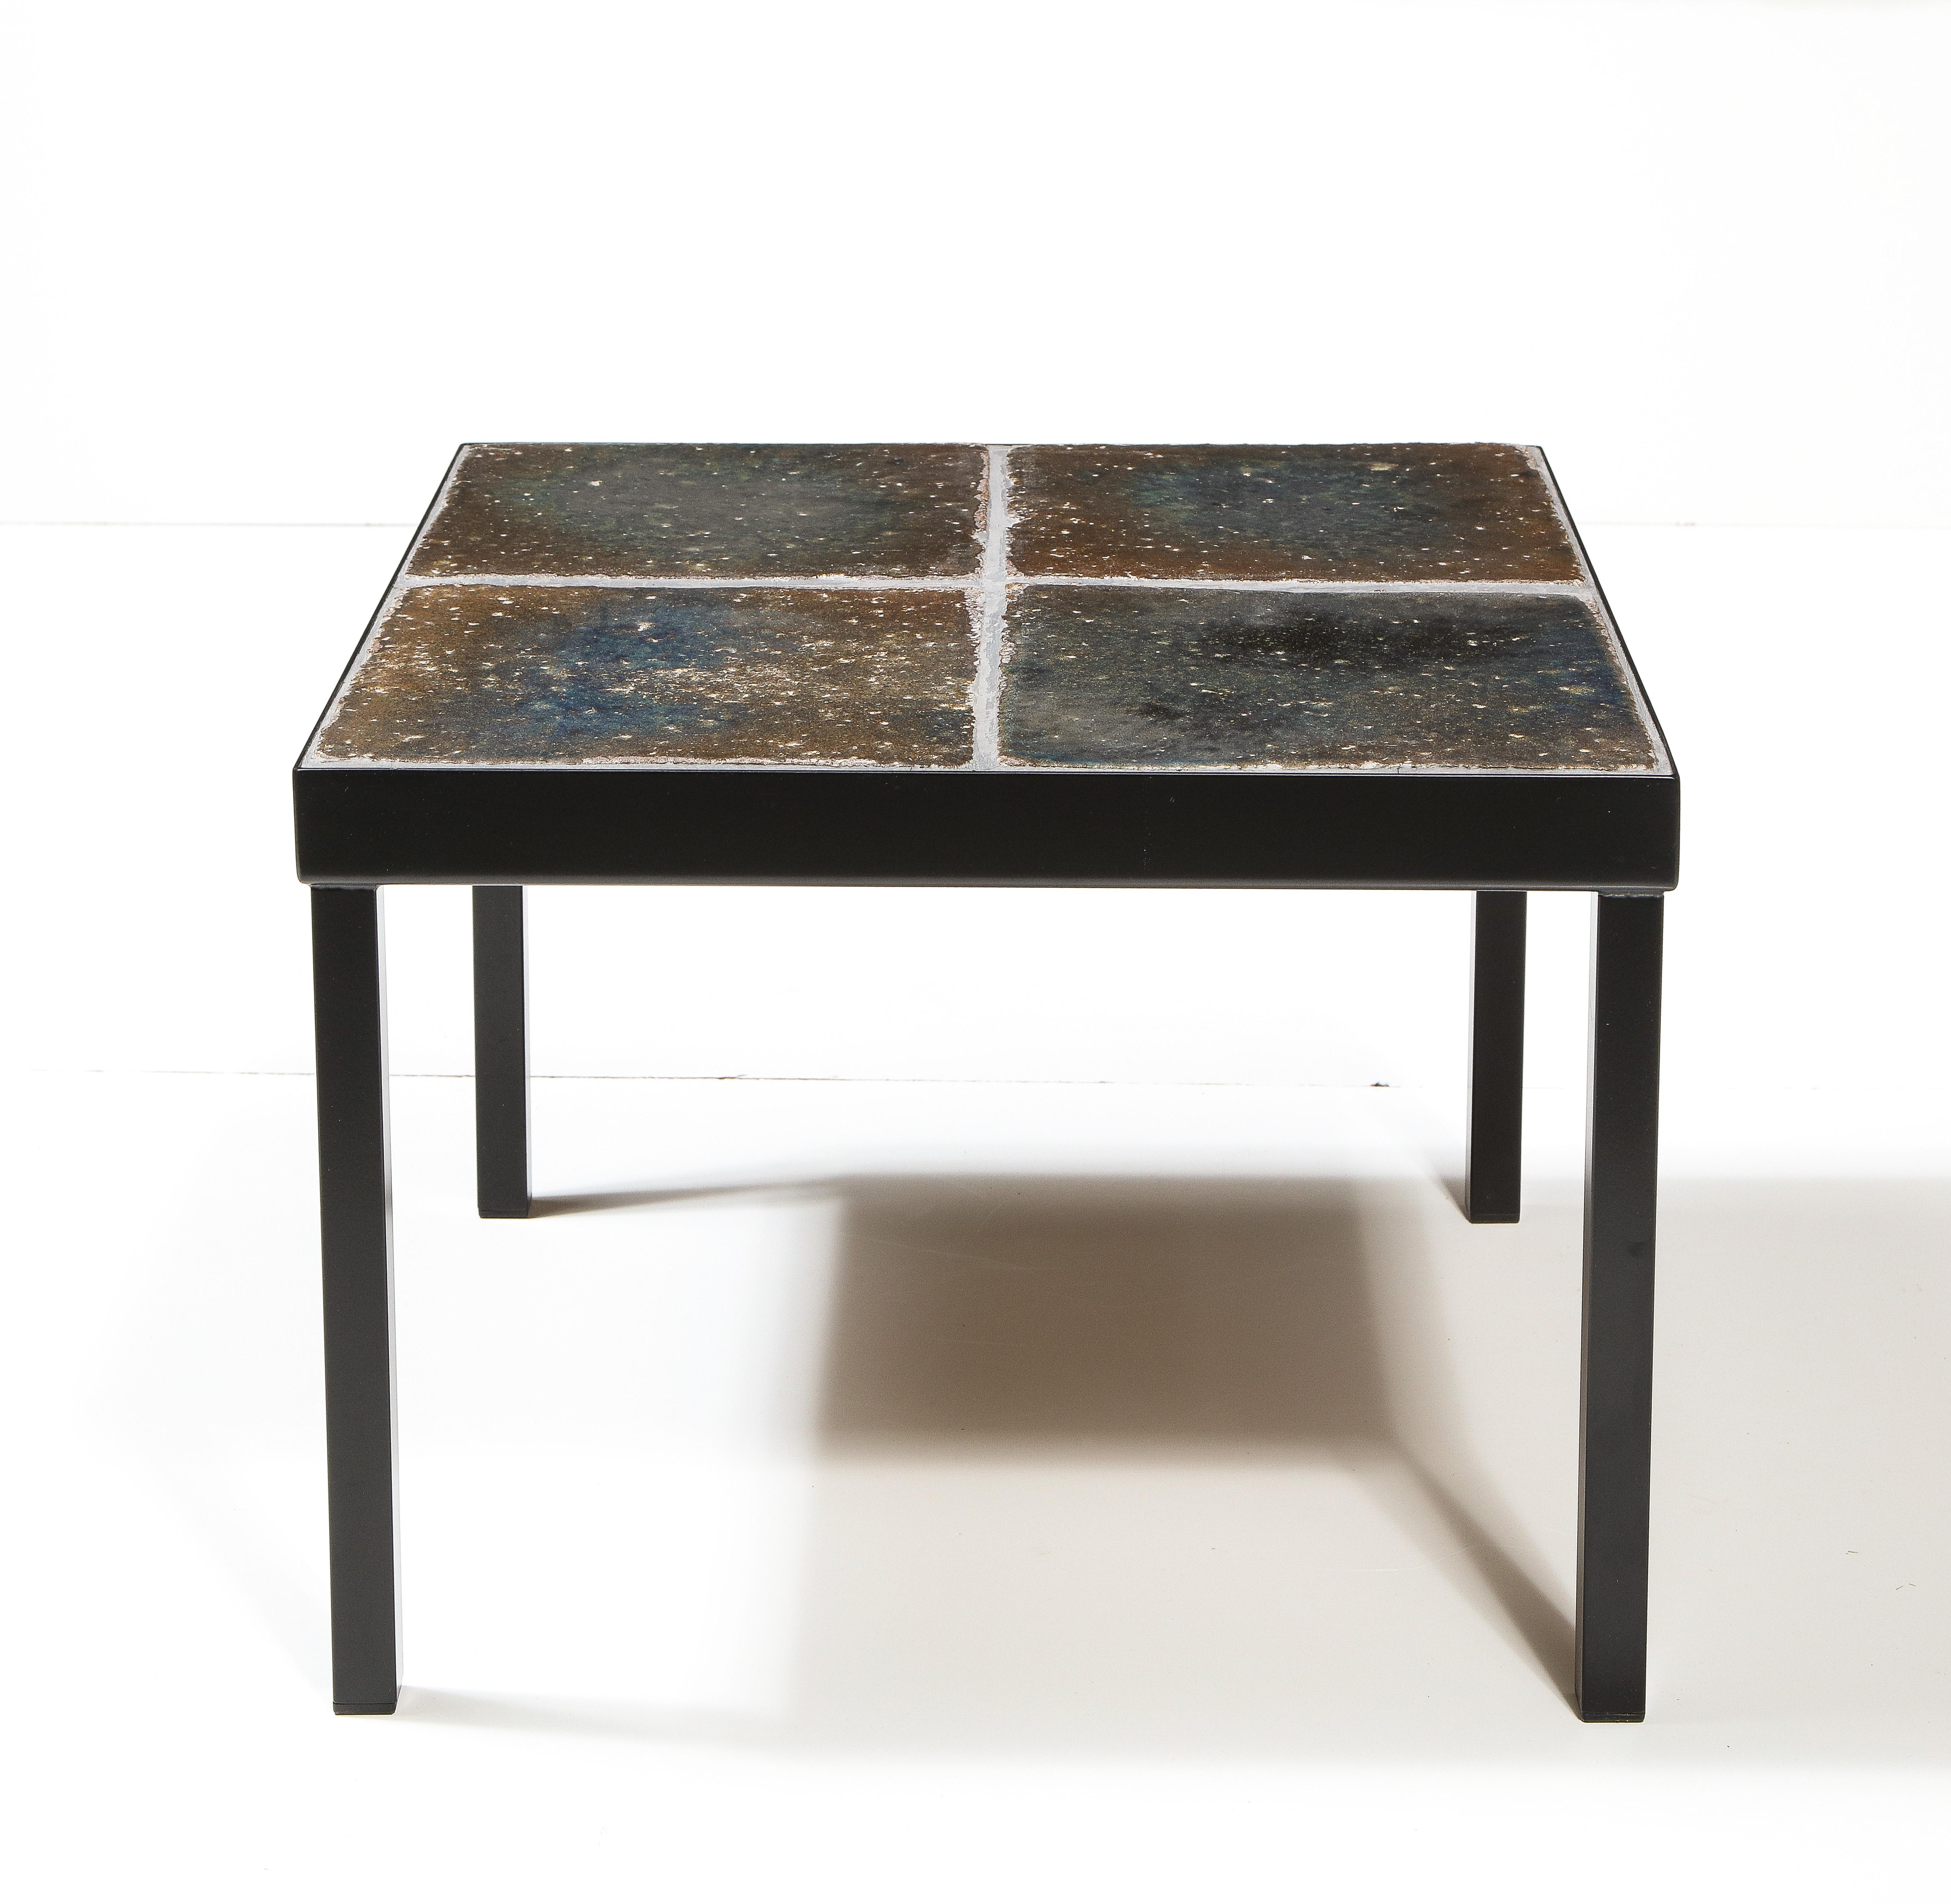 Lava Enameled Side Table, Italy, c. 1960s 

This attractive side table consists of sleek rectangular metal legs and a square enameled lava tile top.